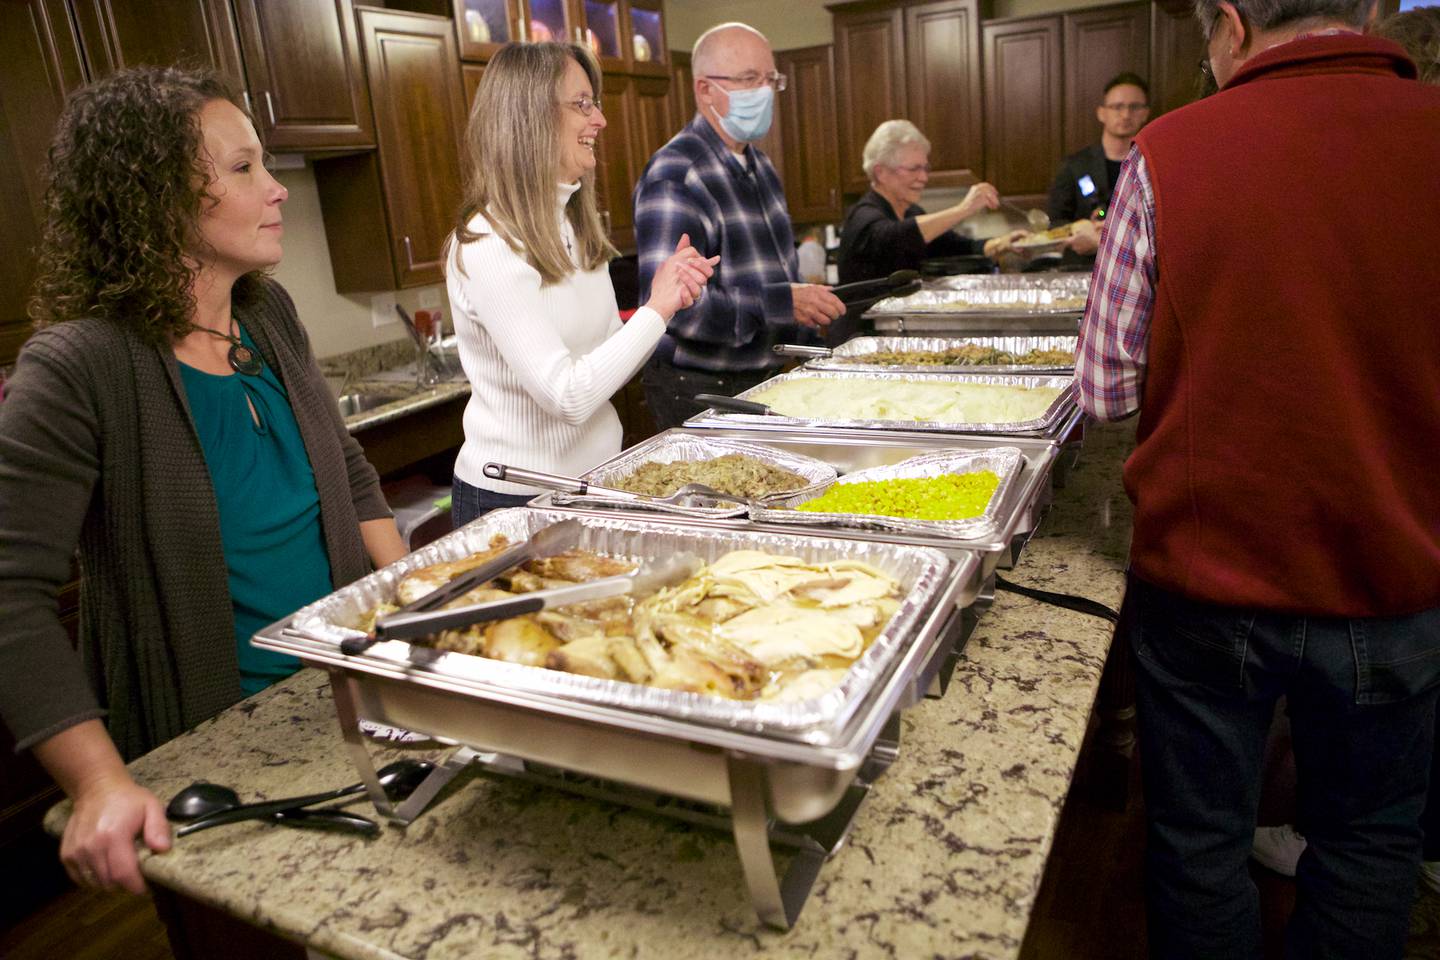 Volunteers serve residents during a Thanksgiving dinner at Gable Point Senior Housing on Saturday, Nov. 19, 2022, in Crystal Lake.